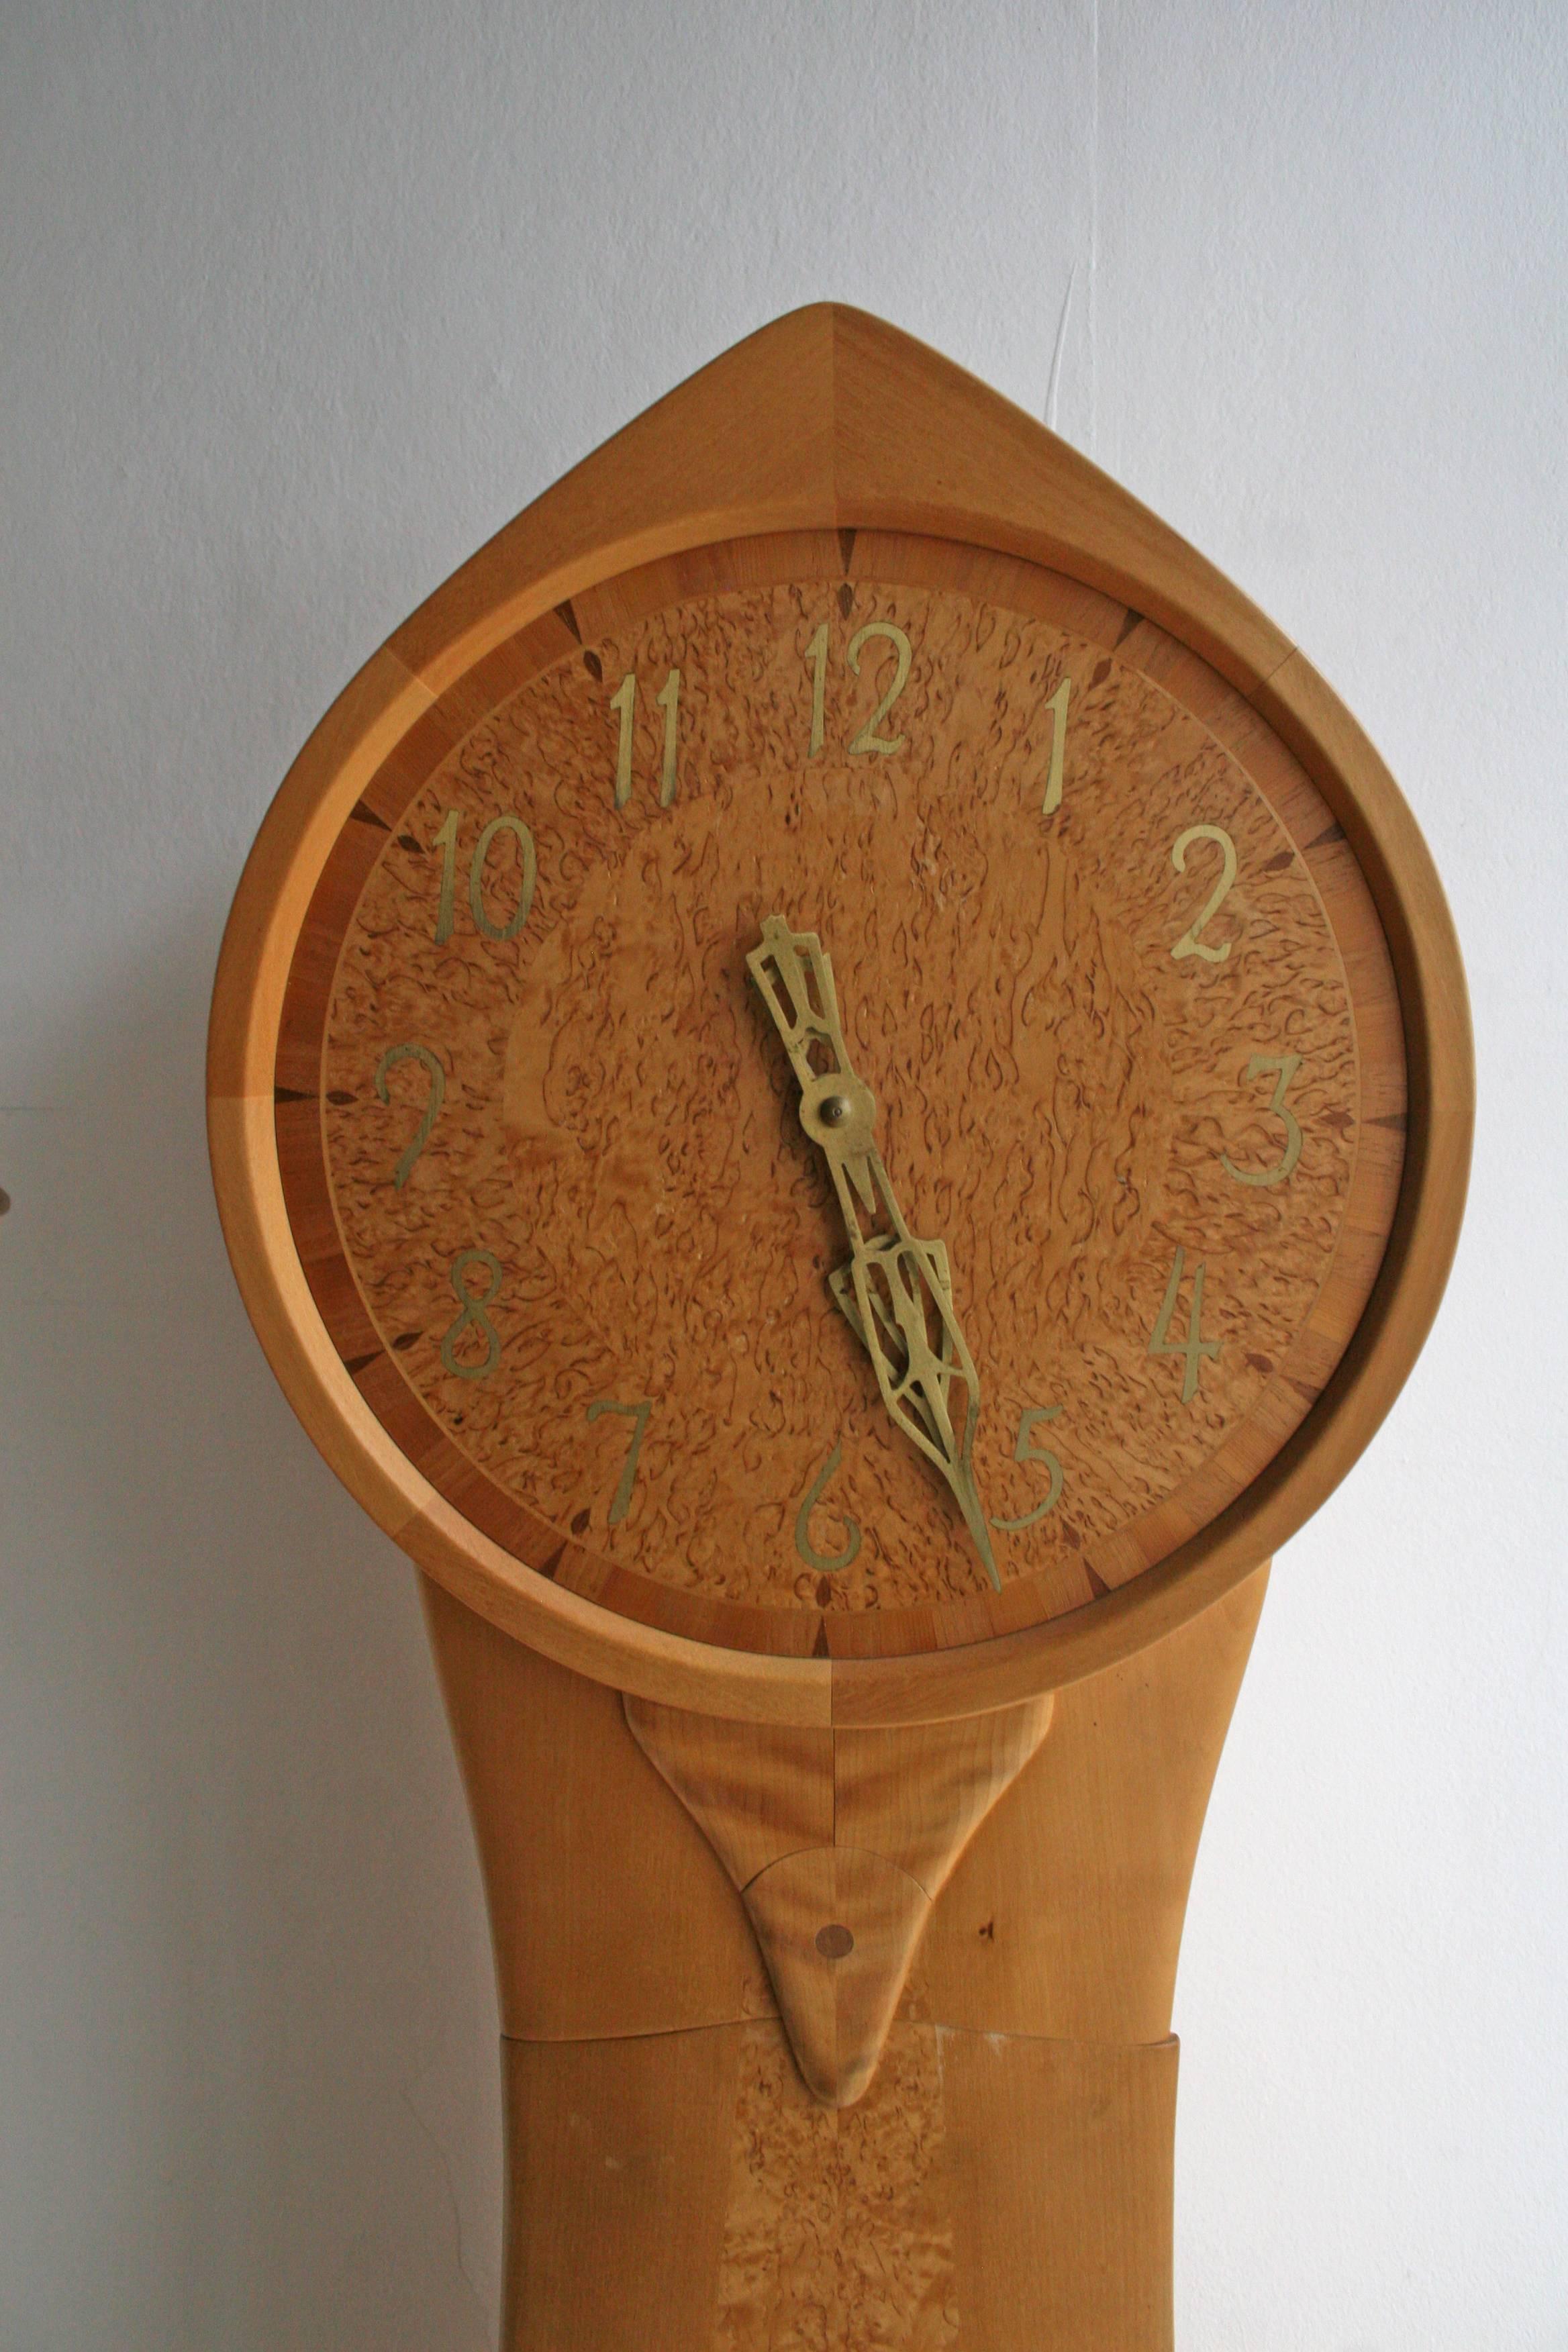 This longcase clock stands 191cm high, 40cm wide and 13cm deep. Carl Malmsten is a Swedish designer who started his shop in 1940. This clock has been made in Sweden until the 1970s. The clock mechanism is a pendulum type made and labelled by